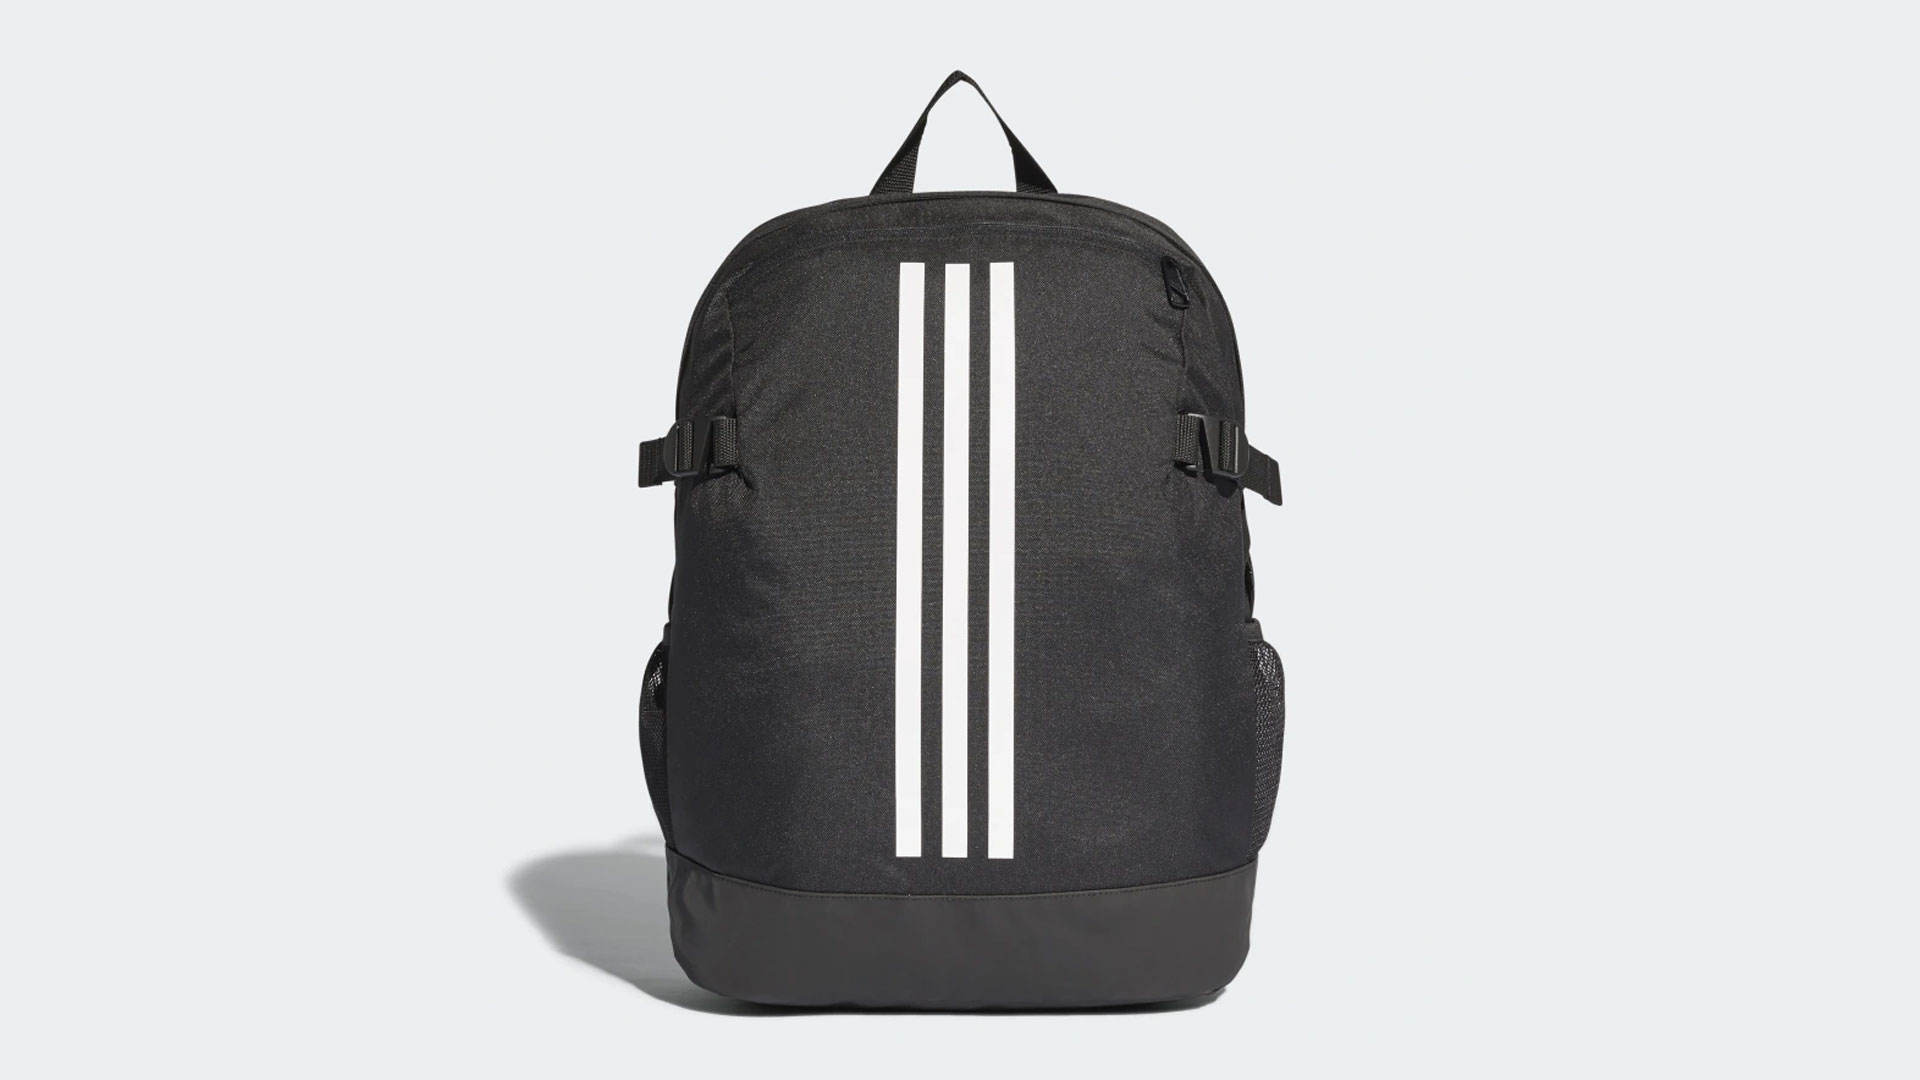 Best Adidas Backpacks: 5 Great Options to Consider 3